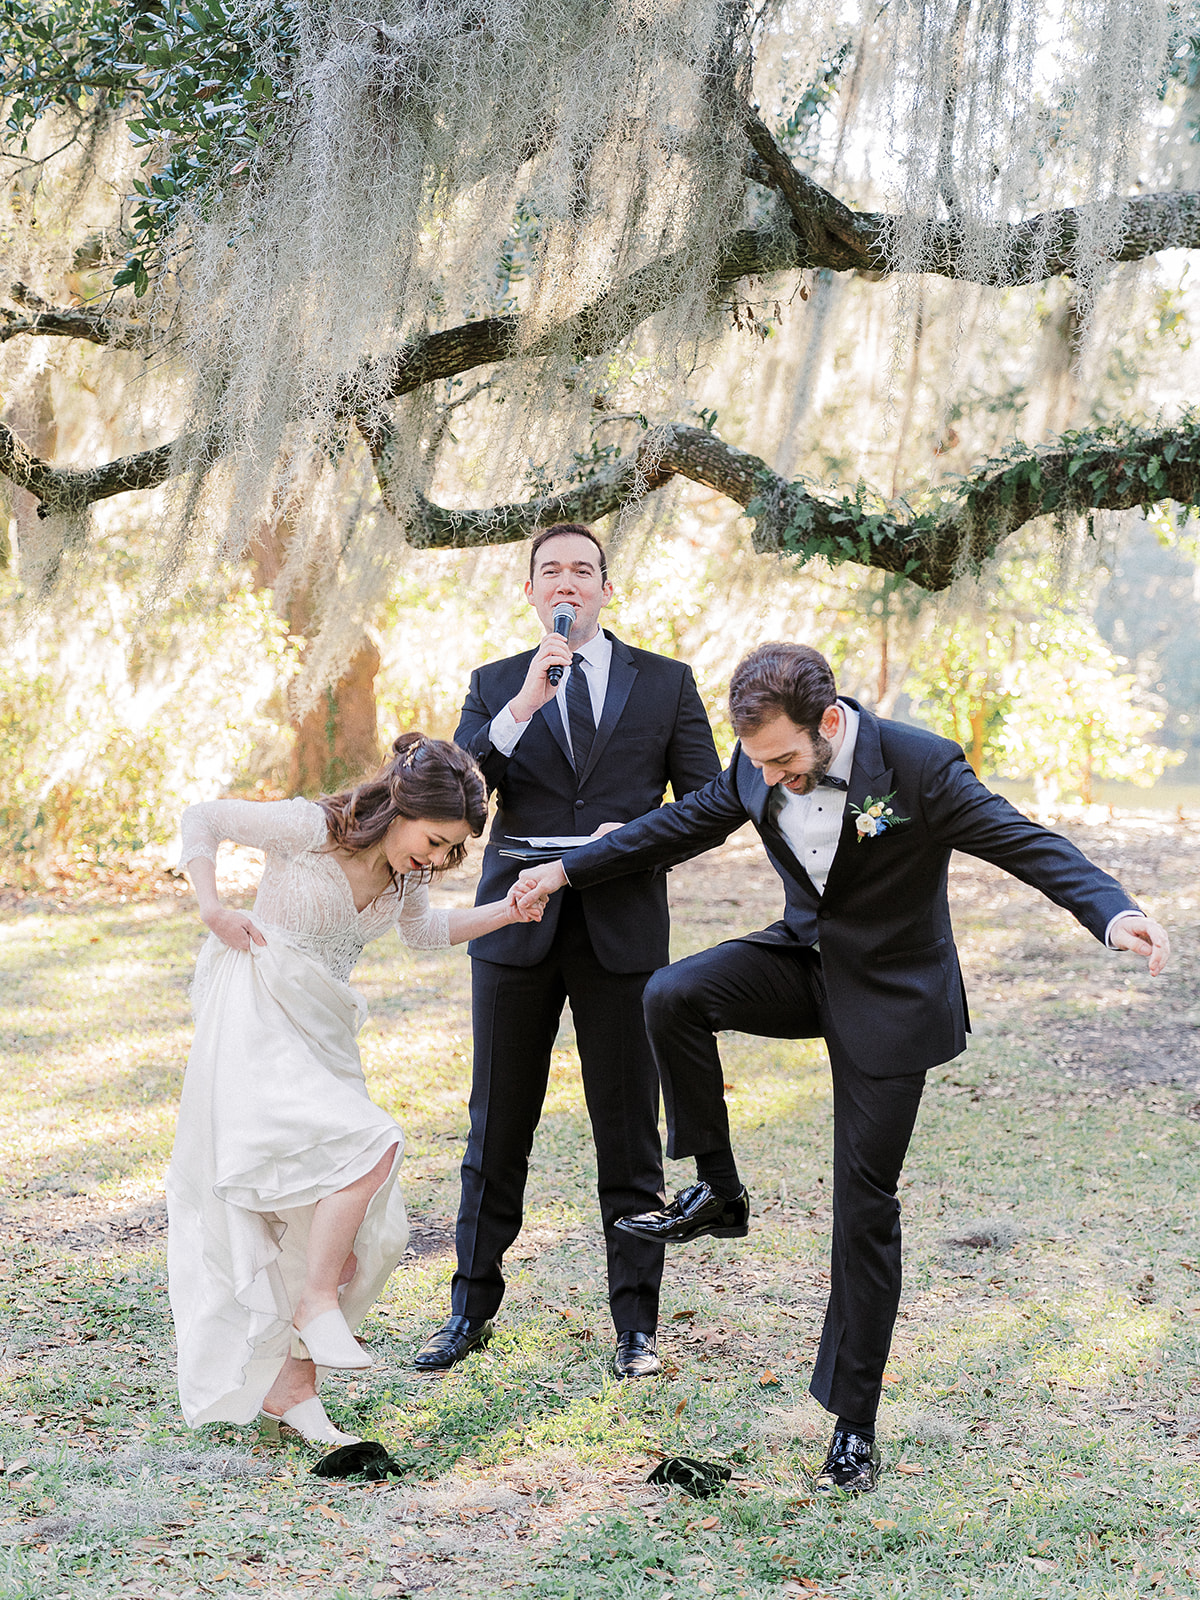 Charleston wedding ceremony beneath a live oak with spanish moss as bride and groom break the glass per Jewish wedding traditions; planning and design by Willow and Oak Events with photography by Kylee Yee